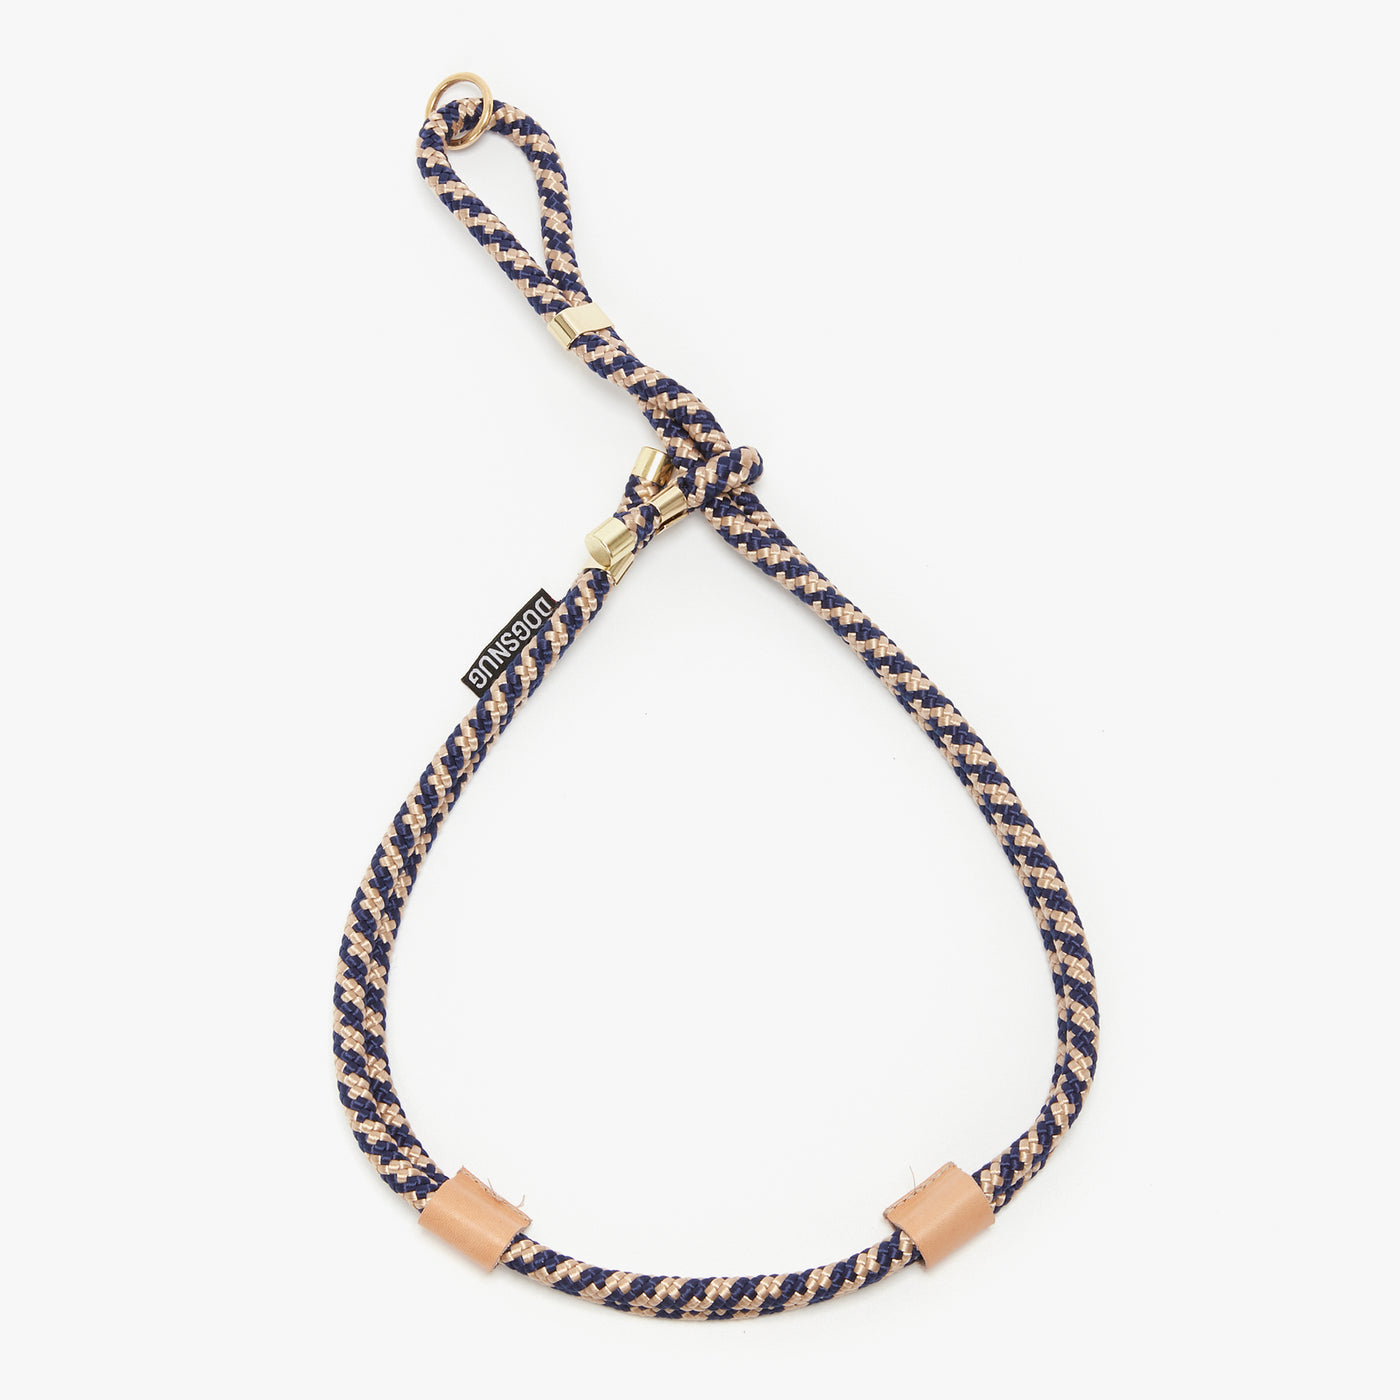 Dog rope harness in tan and navy pattern